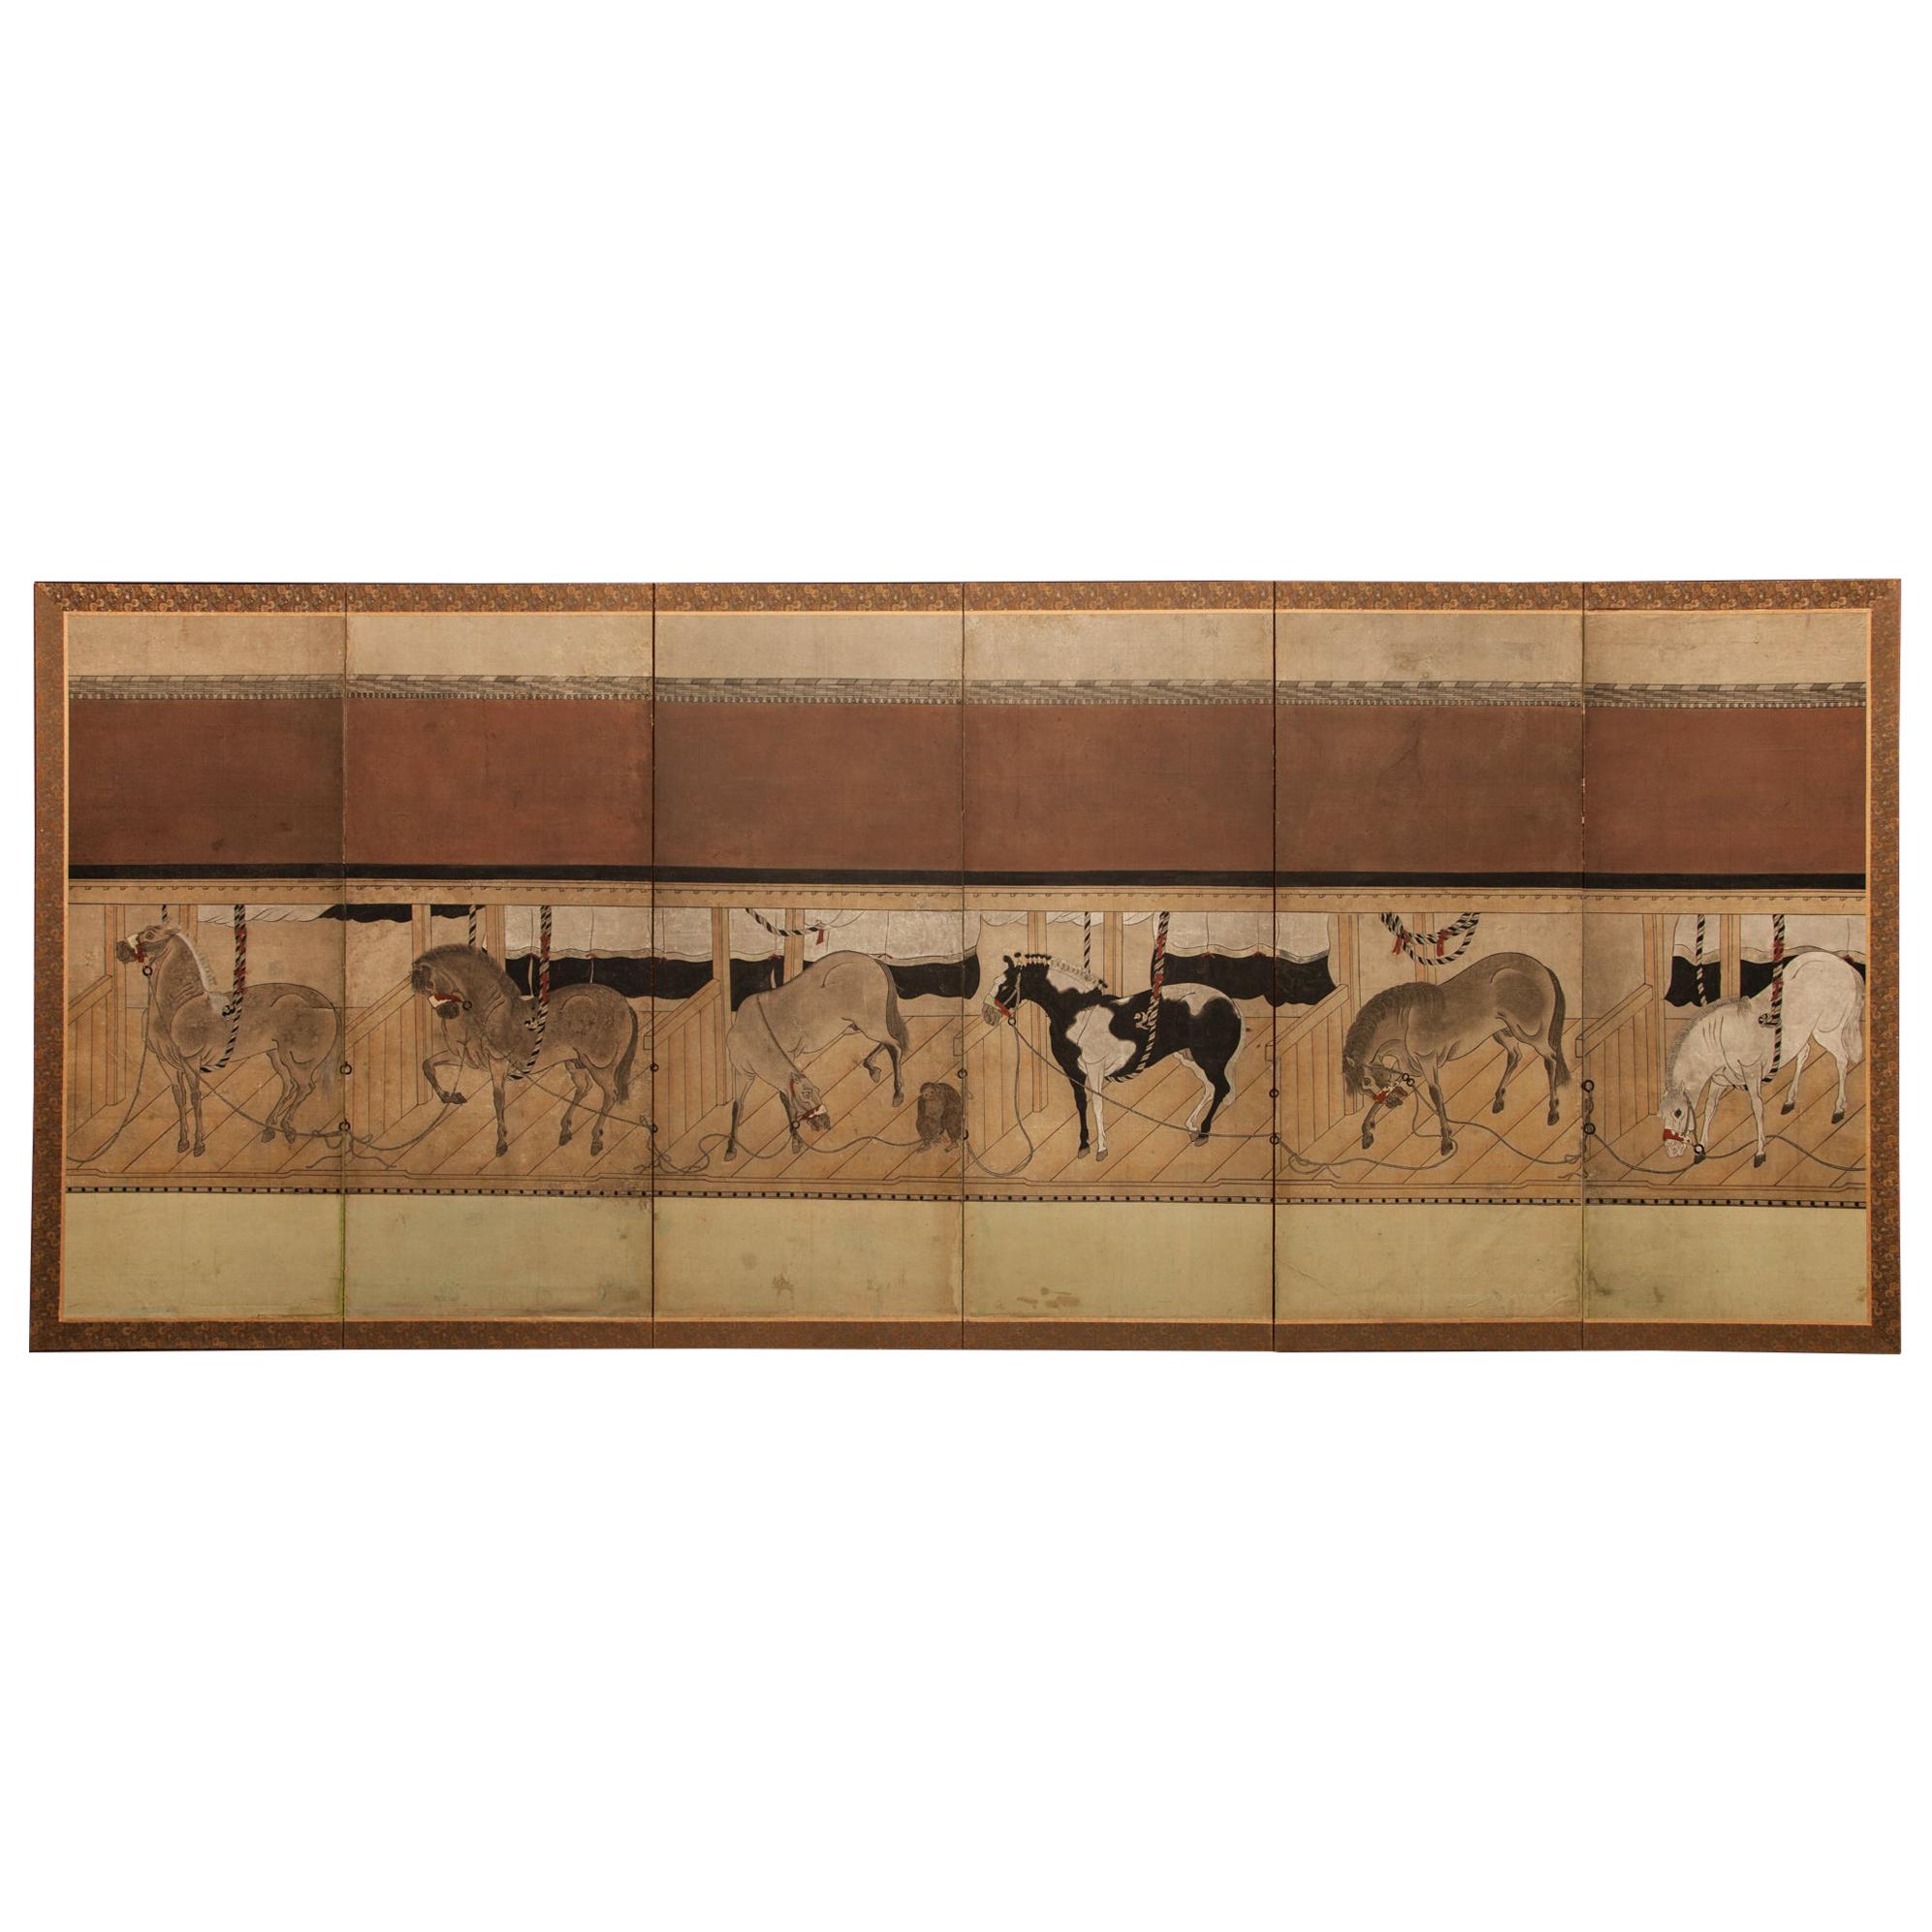 Japanese Six-Panel Screen Horses in Stable